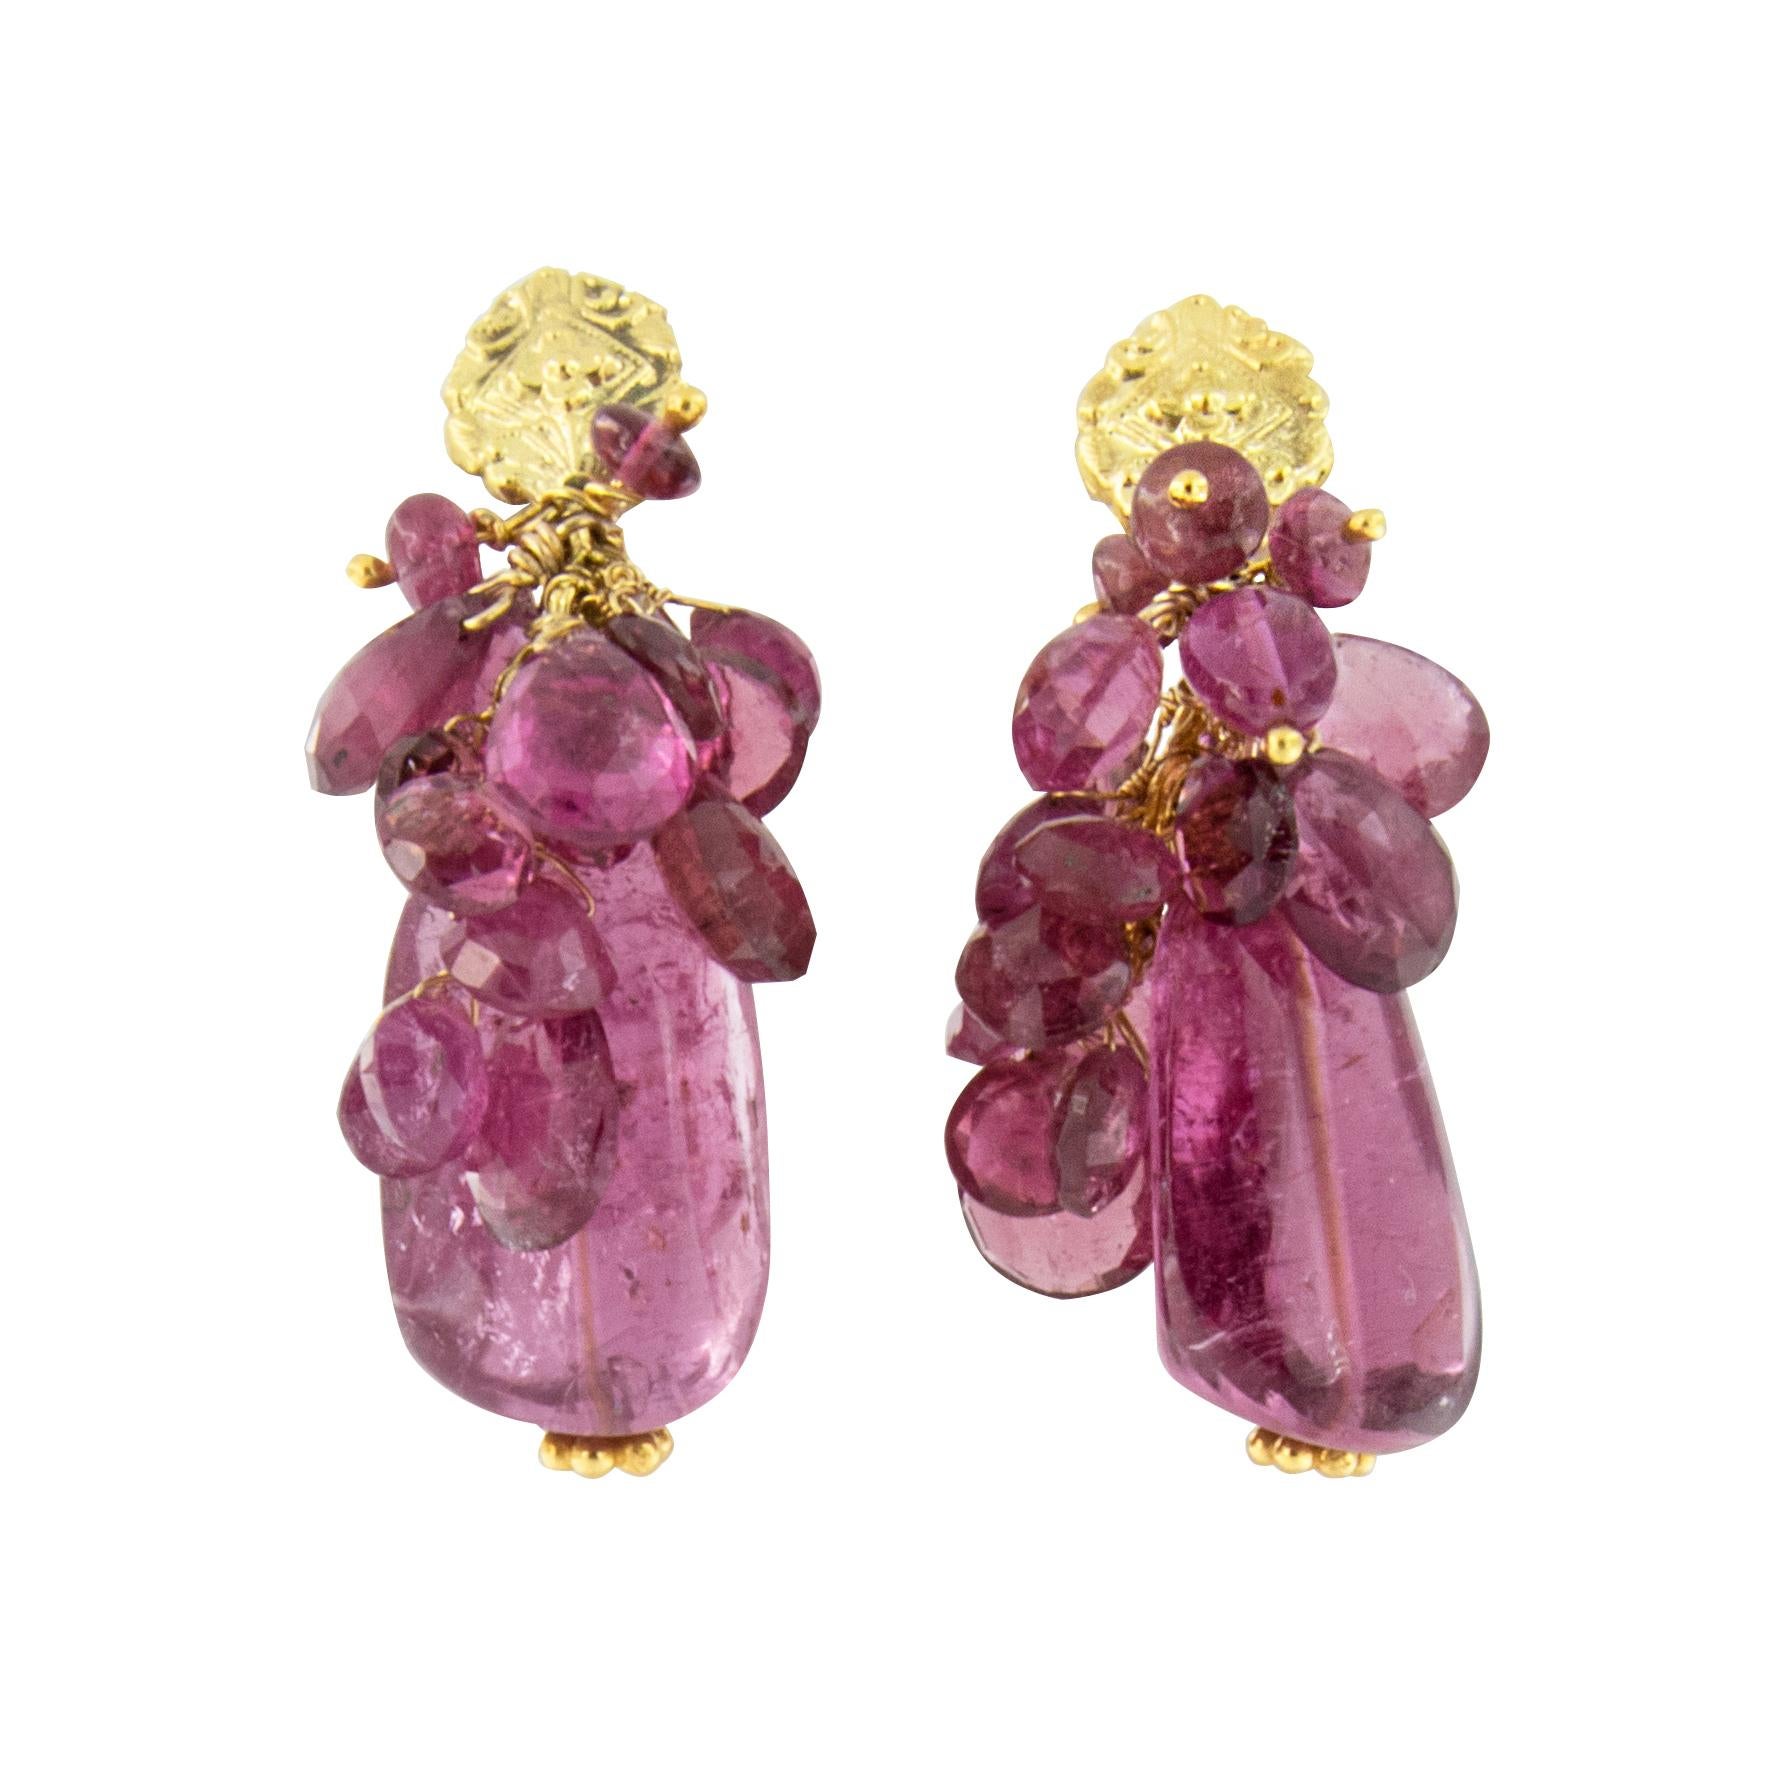 Make a statement with these beautifully hand-made 18 karat yellow gold dangle earrings with 84.42 Cttw of tumbled intense pink tourmaline drops individually wired for full movement. Designed and handmade by Susan Hoge. Susan Hoge’s work has been